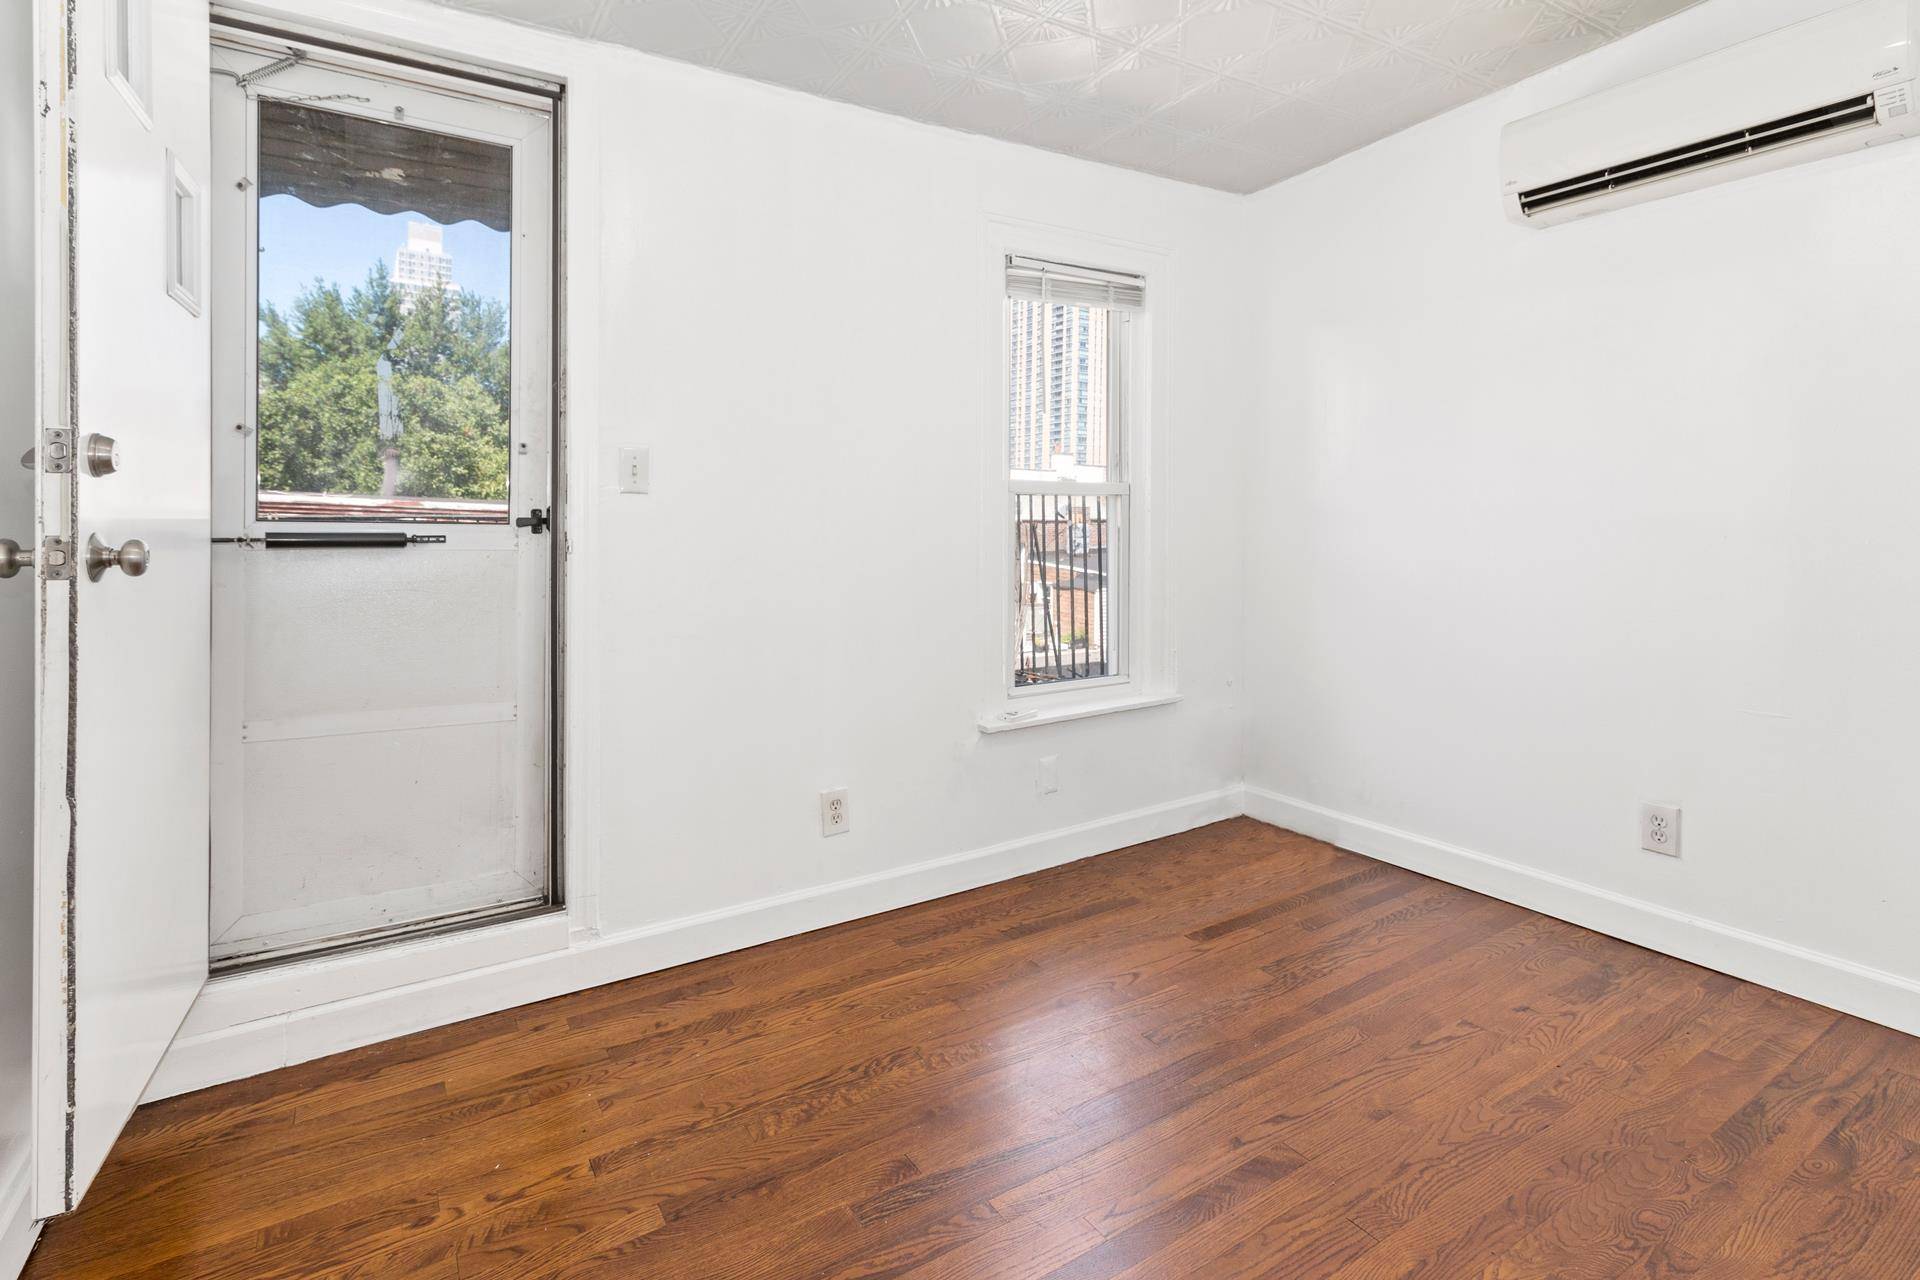 PRIME Location in Hunter's Point LIC Steps from the Vernon Boulevard Jackson Avenue Station 7 Train Only 5 minute train ride to Grand Central Just two blocks from the parks ...